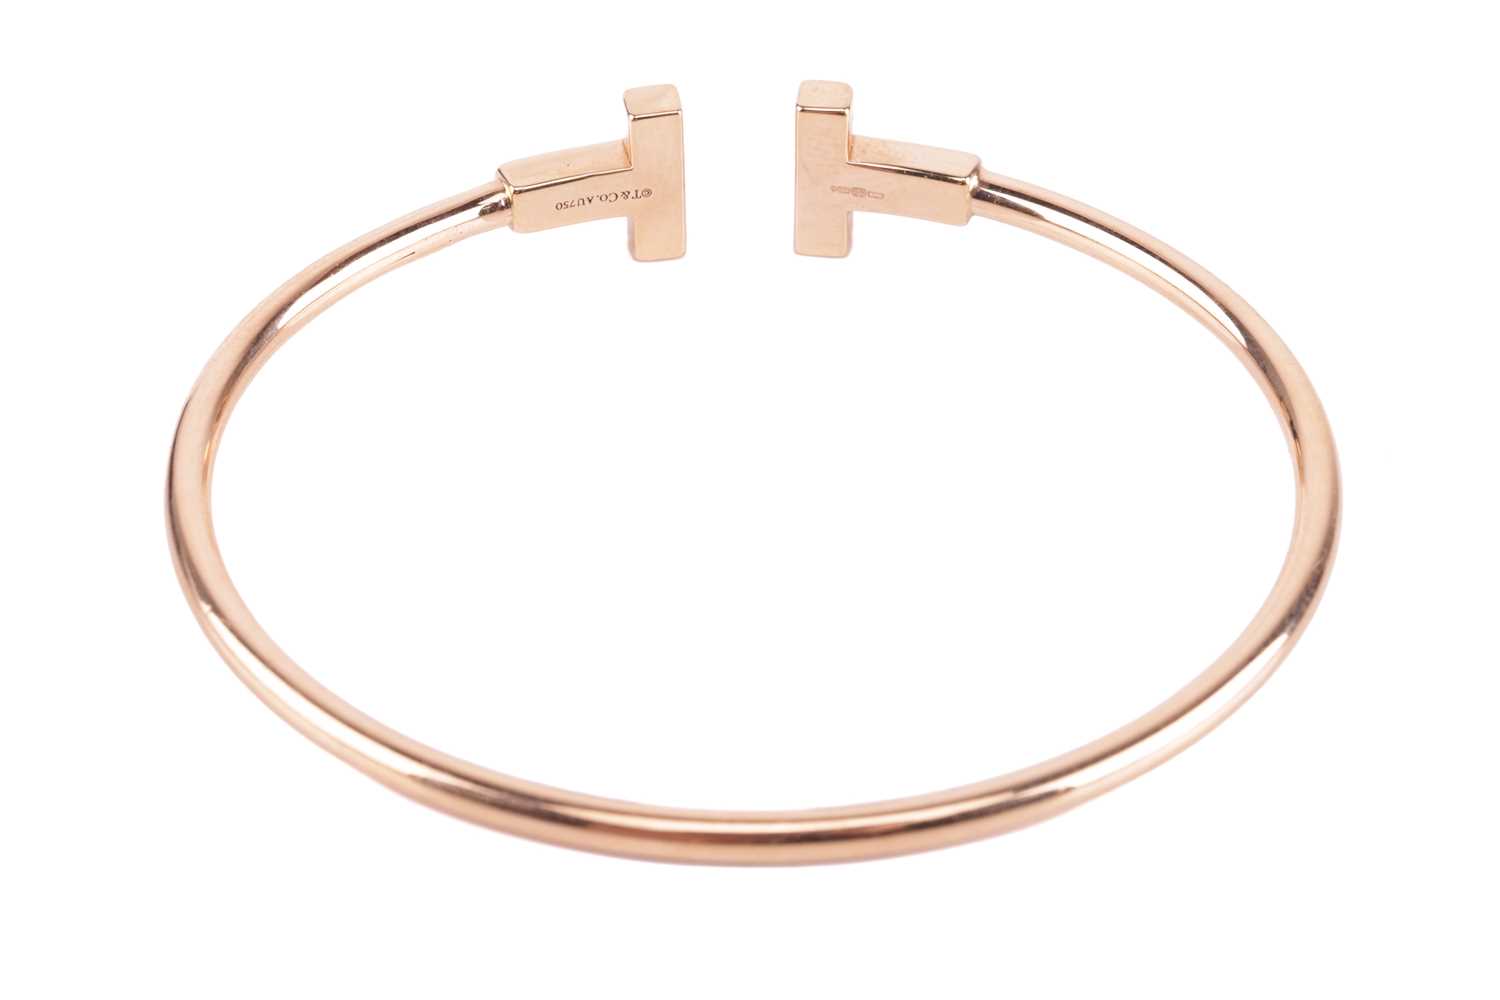 Tiffany &amp; Co. - a Tiffany T wire bracelet in 18ct yellow gold, with double T terminals, signed a - Image 2 of 3